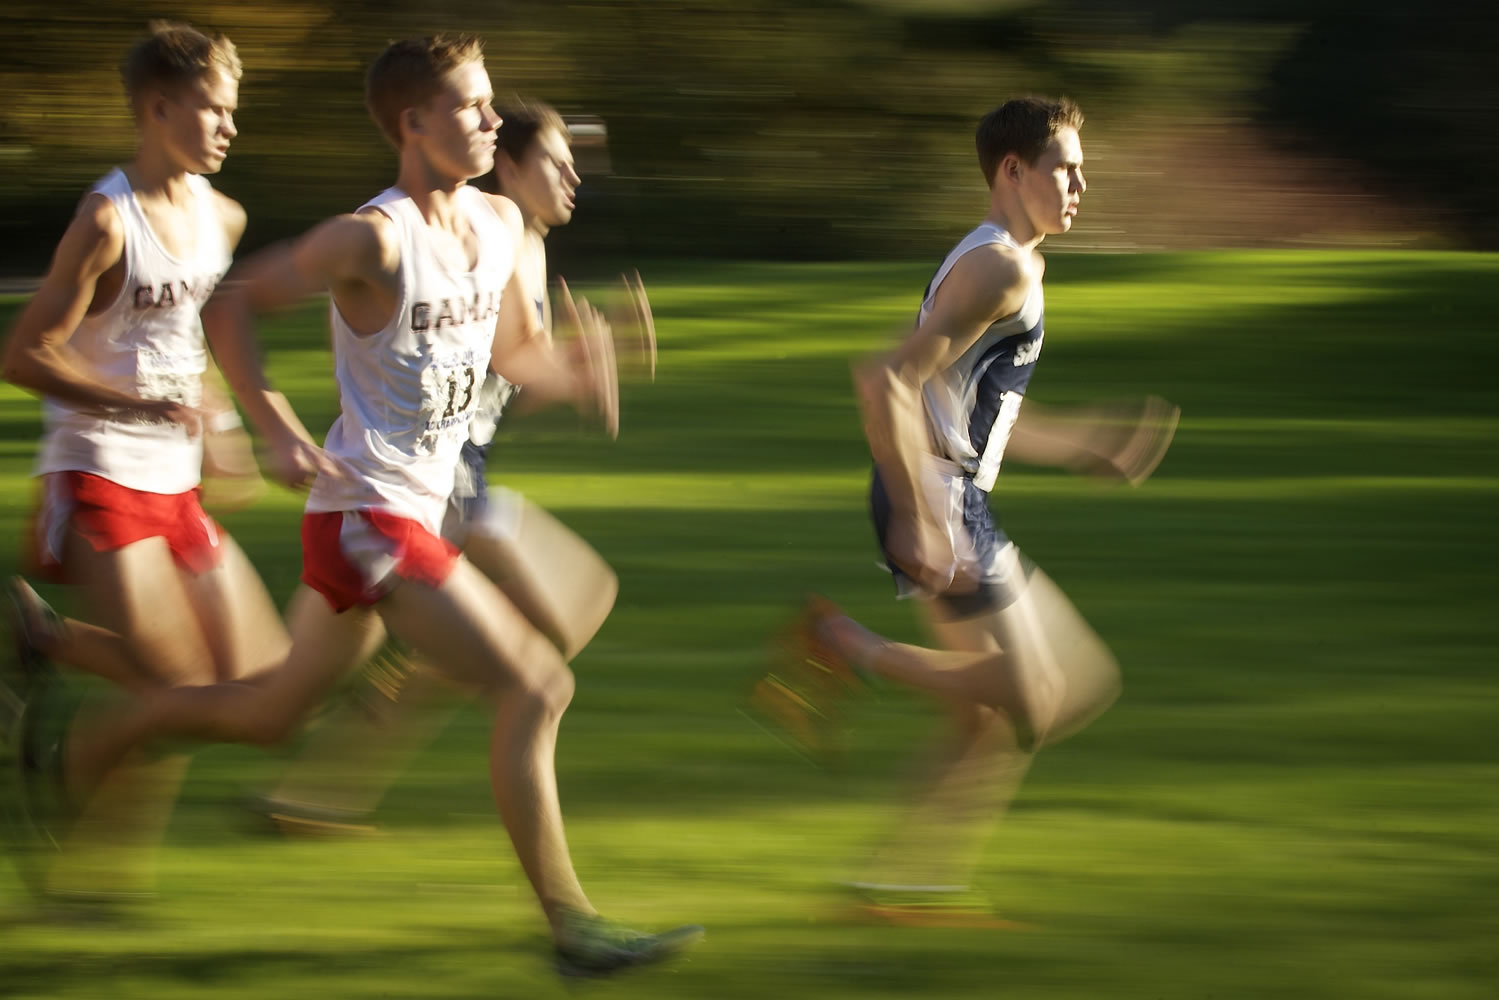 Kaden Harbertson, right, of Skyview High School competes in the Class 4A district cross country meet Wednesday at Lewisville Park near Battle Ground.